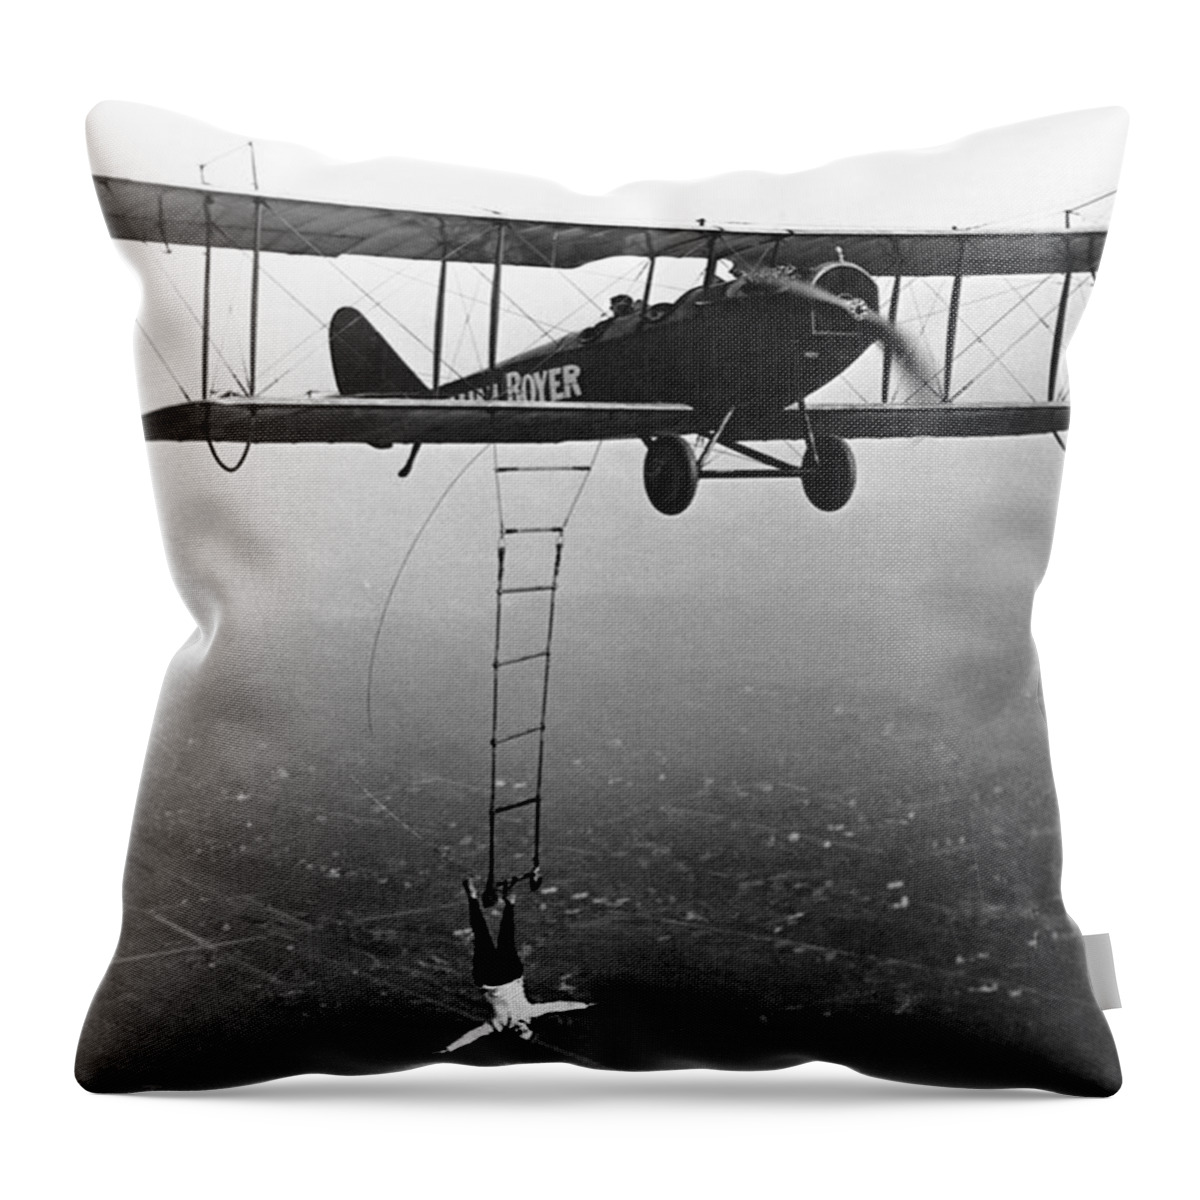 Entertainment Throw Pillow featuring the photograph Lillian Boyer, American Daredevil Wing by Science Source